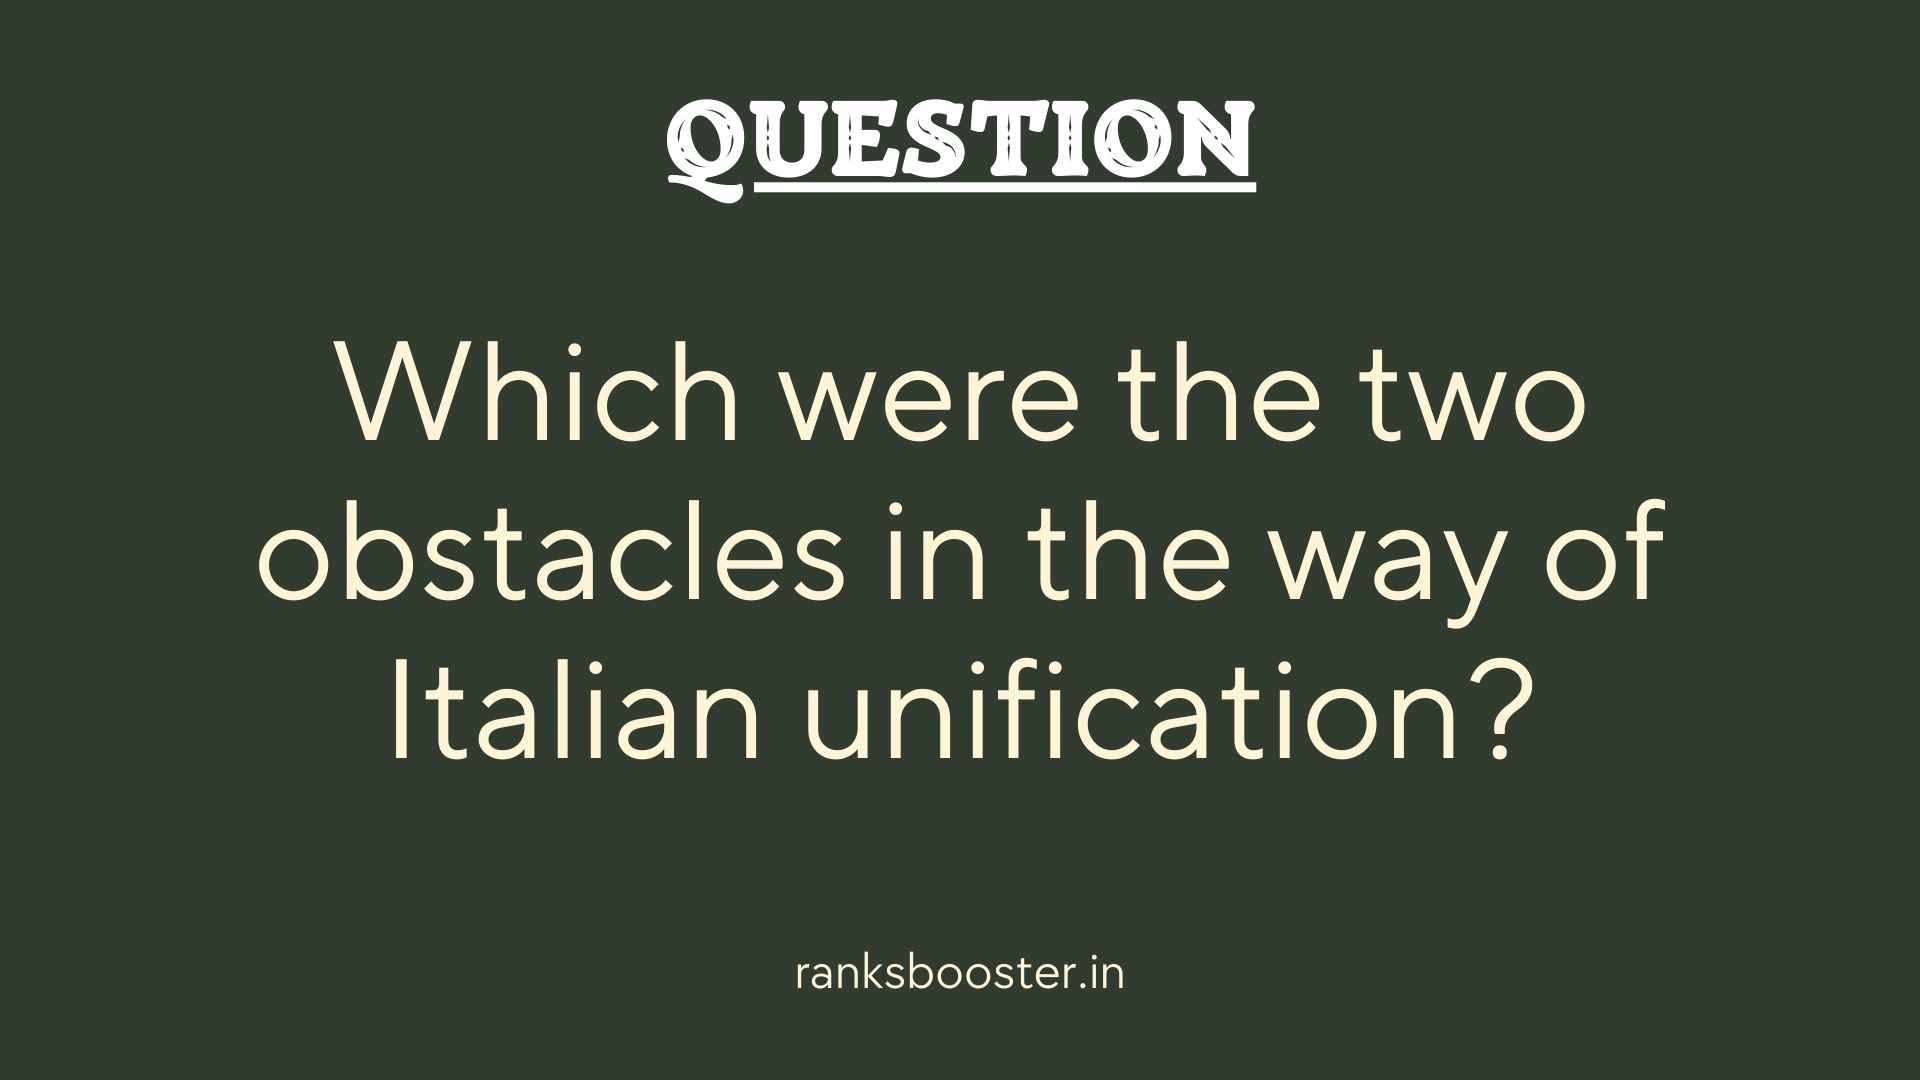 Question: Which were the two obstacles in the way of Italian unification?